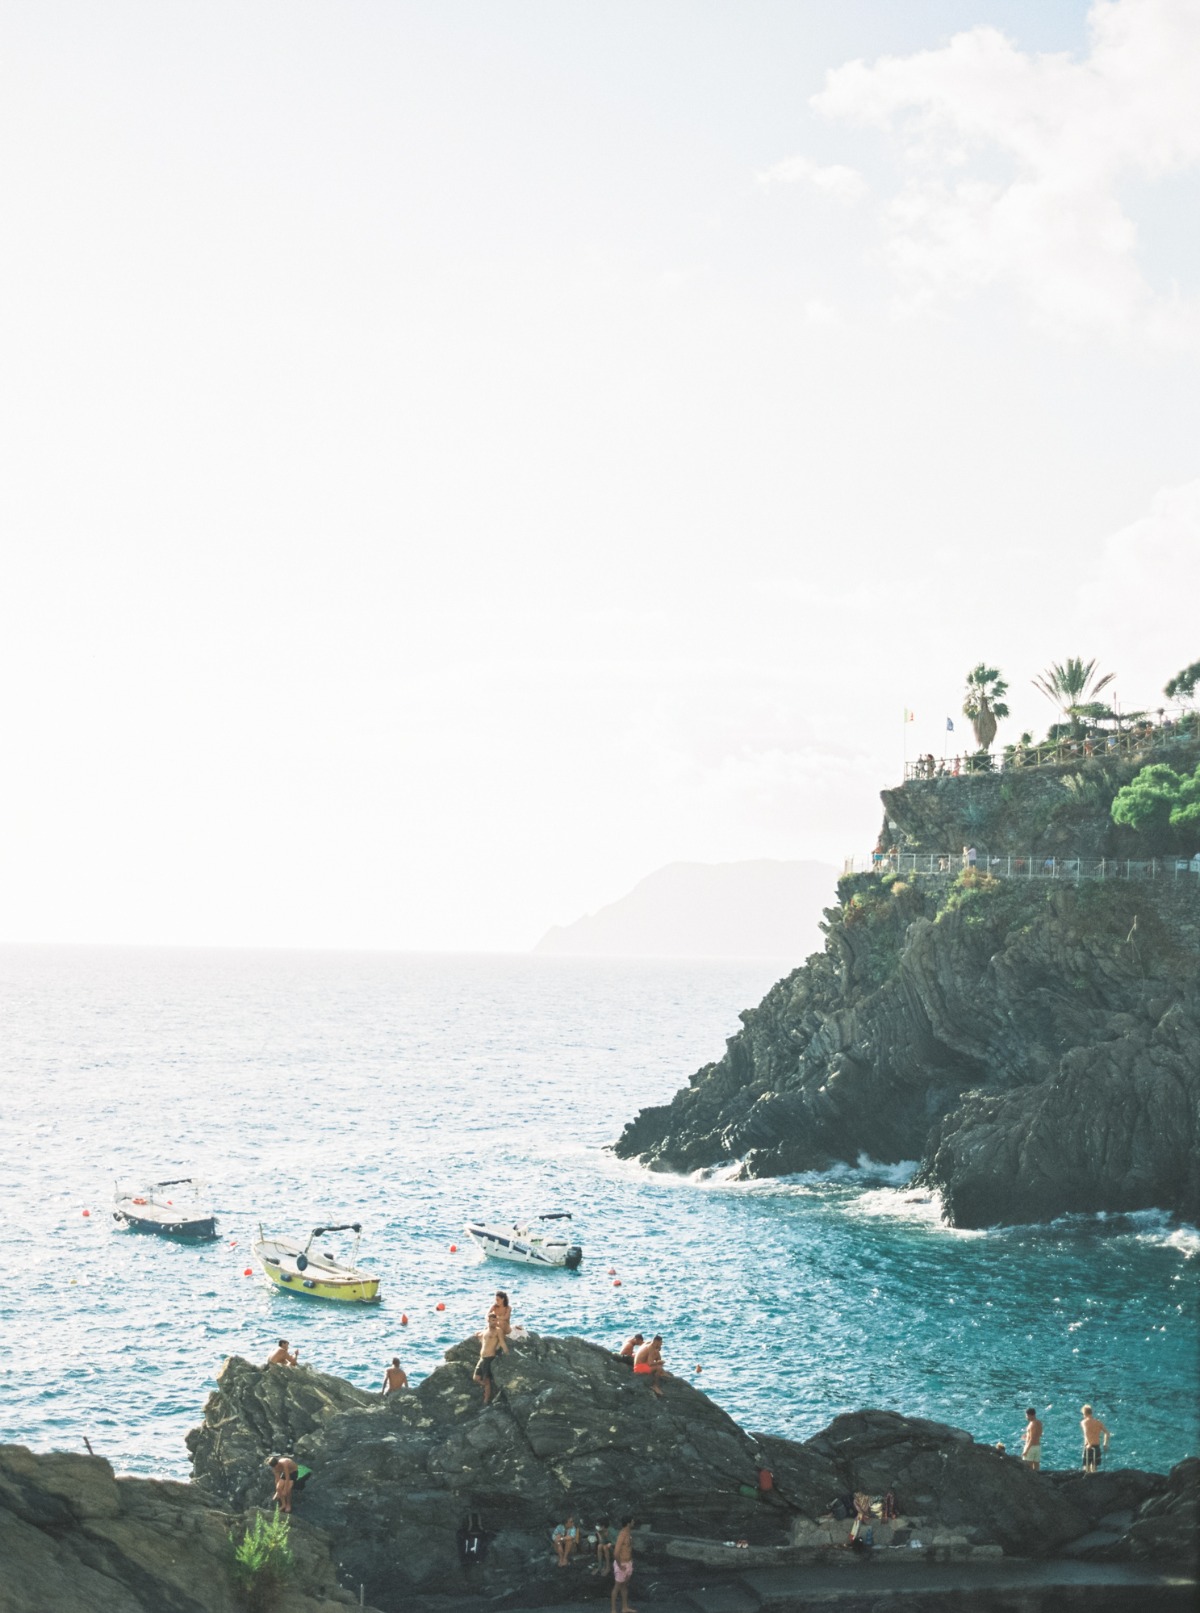 A Picturesque Engagement In Cinque Terre, Tuscany